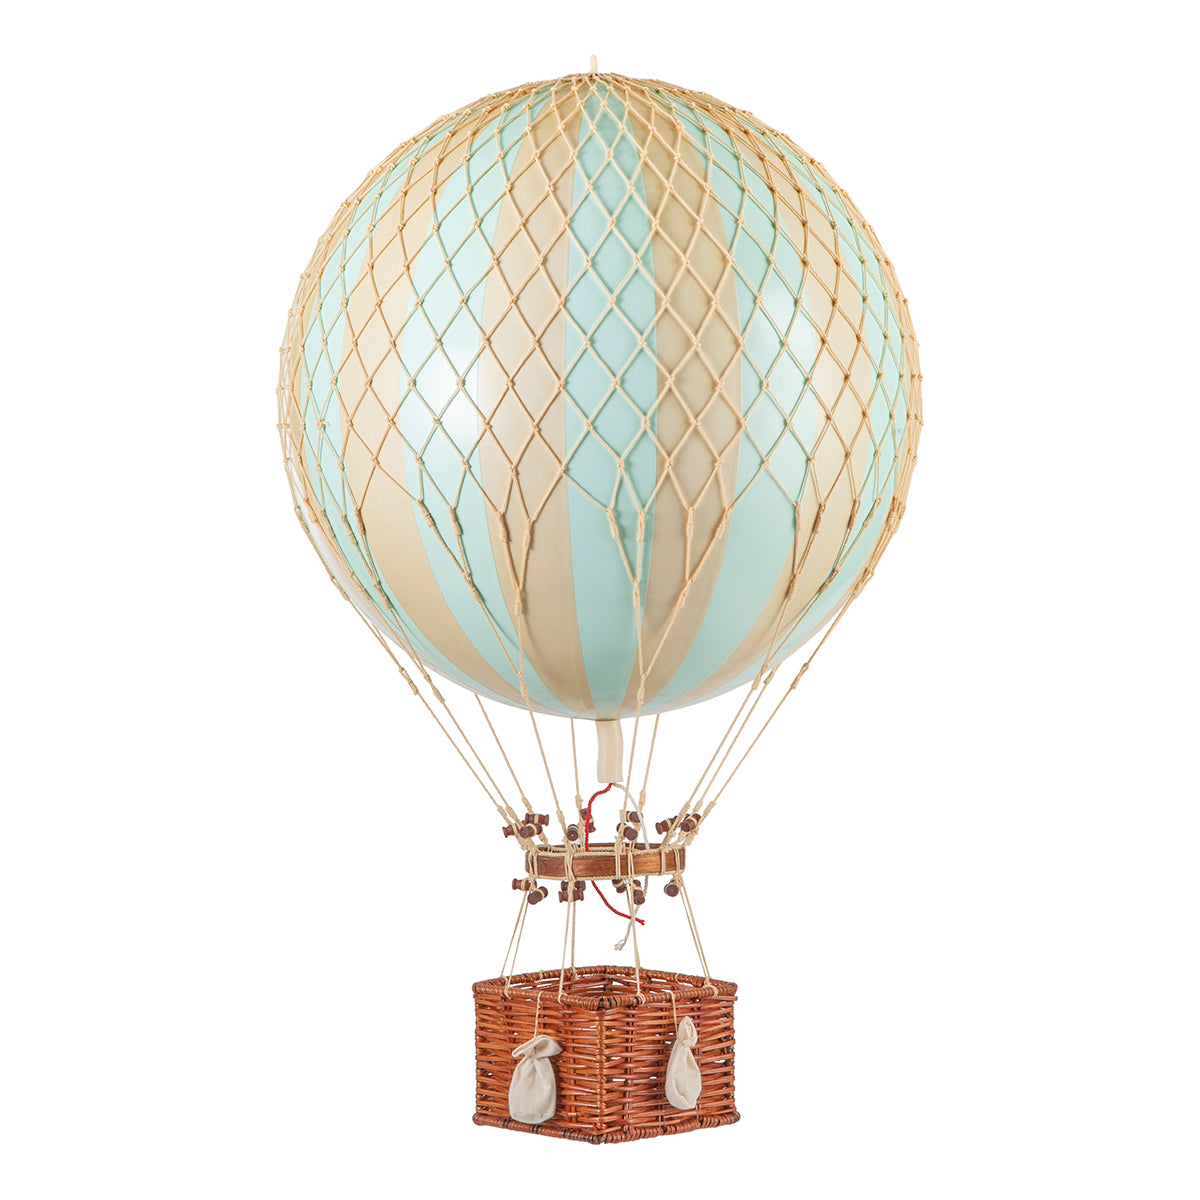 A Wonderen Stroopwafels hot air balloon with a basket on it, designed as a beautiful decorative piece inspired by Jules Verne.